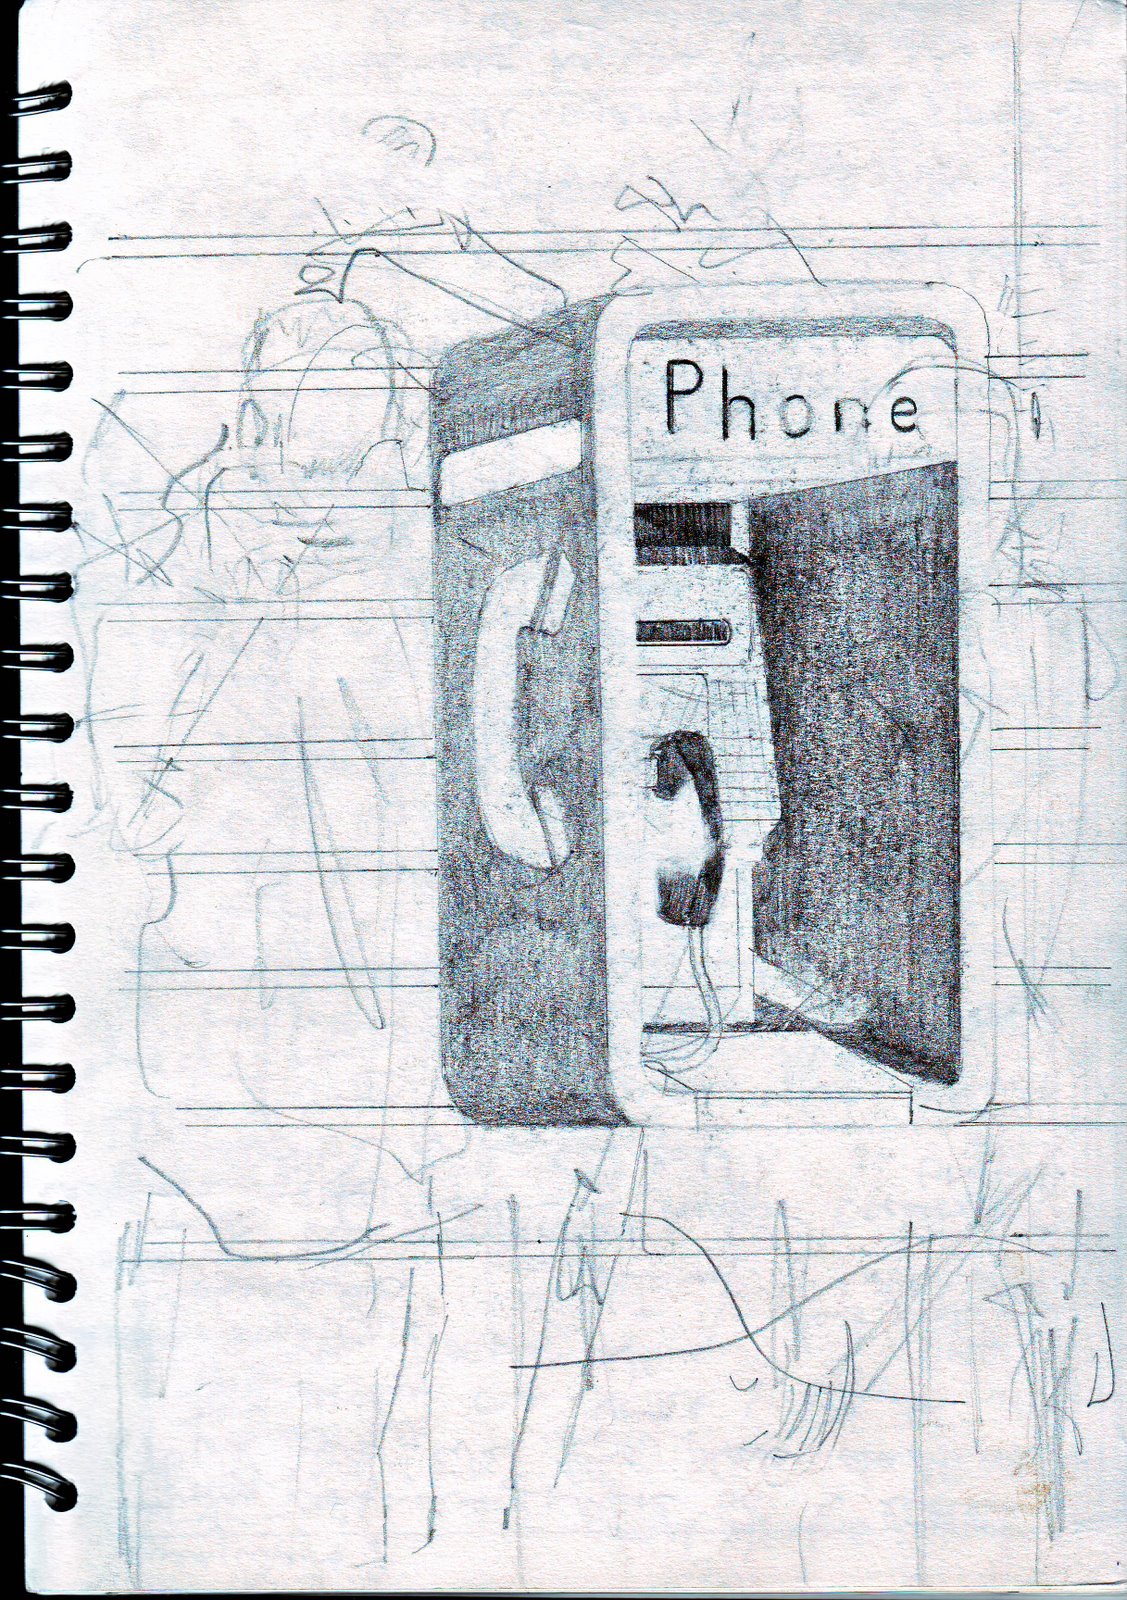 [CAMPSITE+PHONE+BOX+SKETCH+BY+PAUL+ANTHONY+RAMSDEN+2008.JPG]